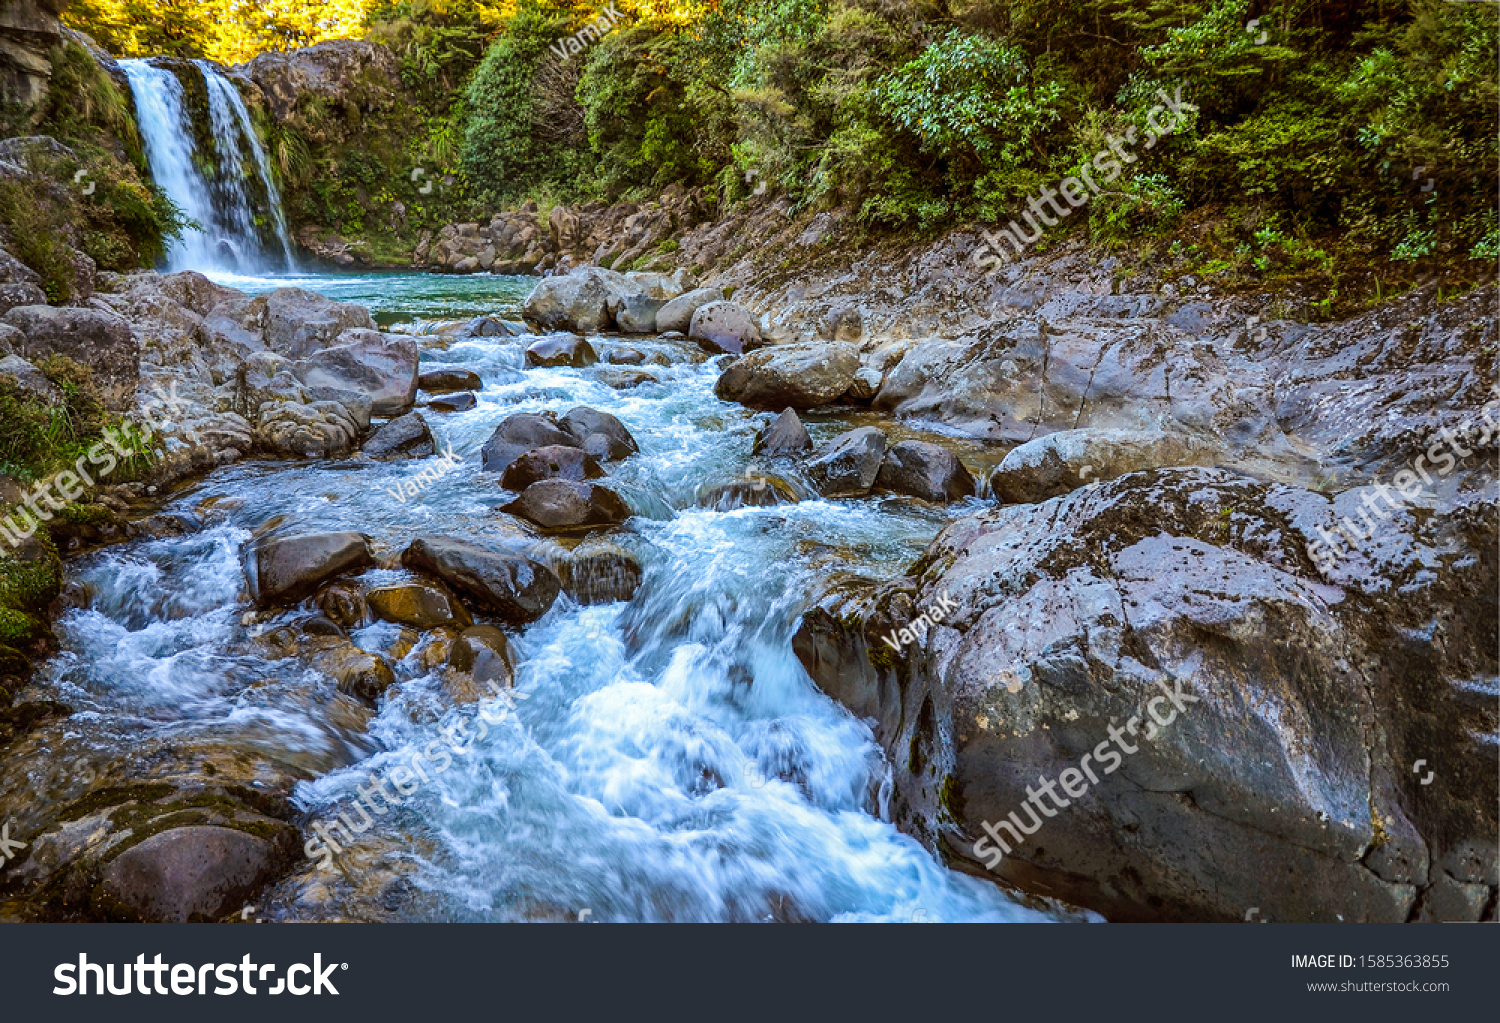 River stream waterfall in forest landscape #1585363855